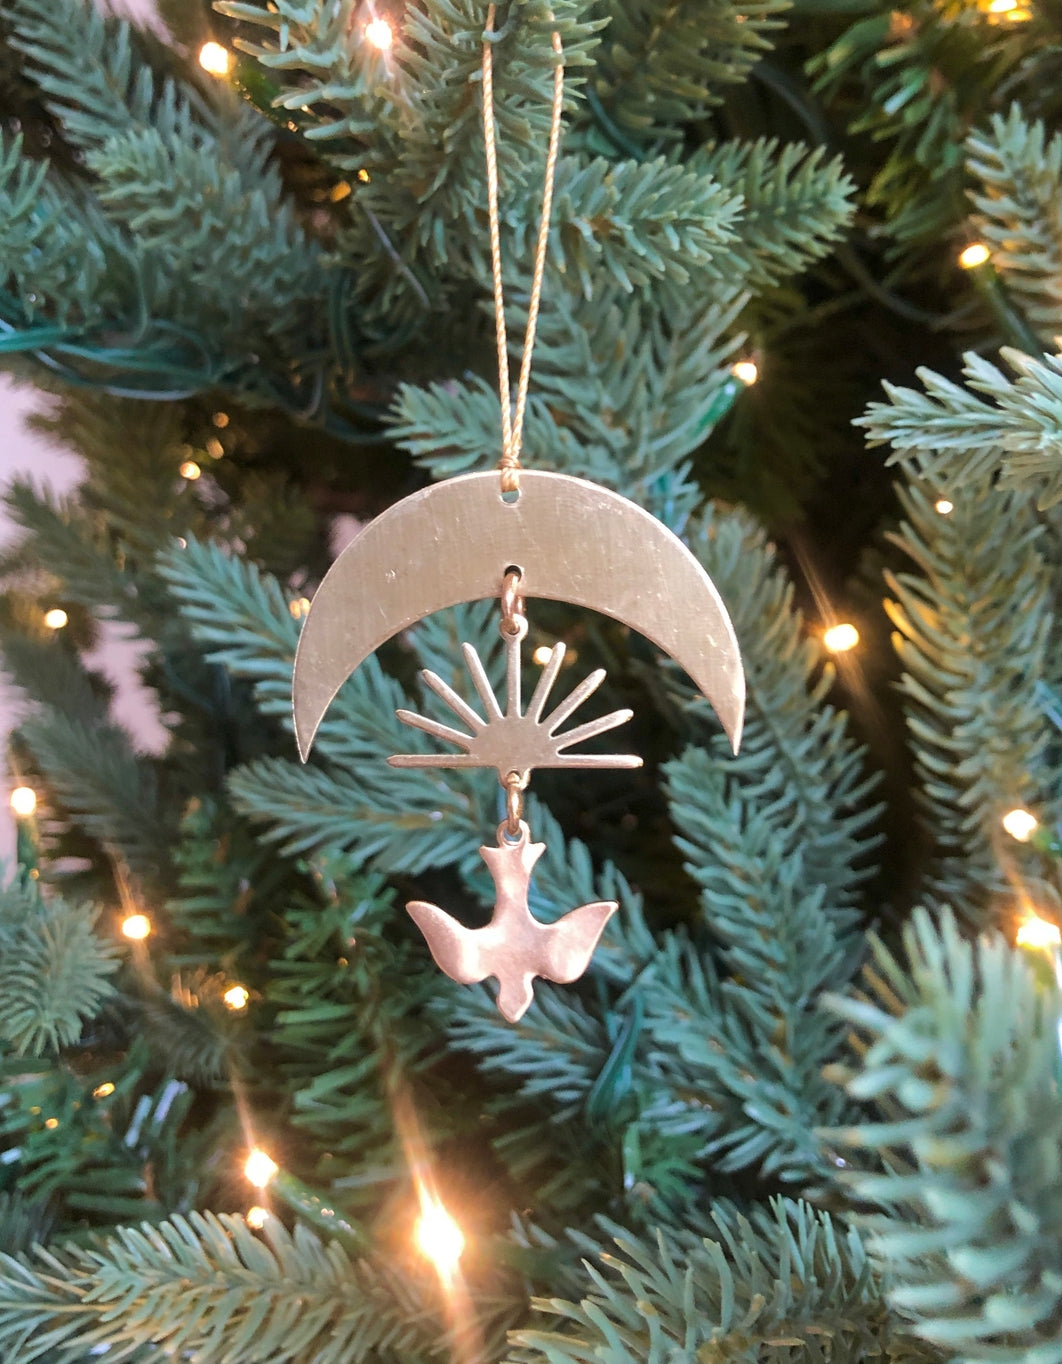 Artisan-crafted story ornament made from hand-cut/hammered brass sheet. Ready to hang.Ornament measures roughly 3” tall not including hanging twine.